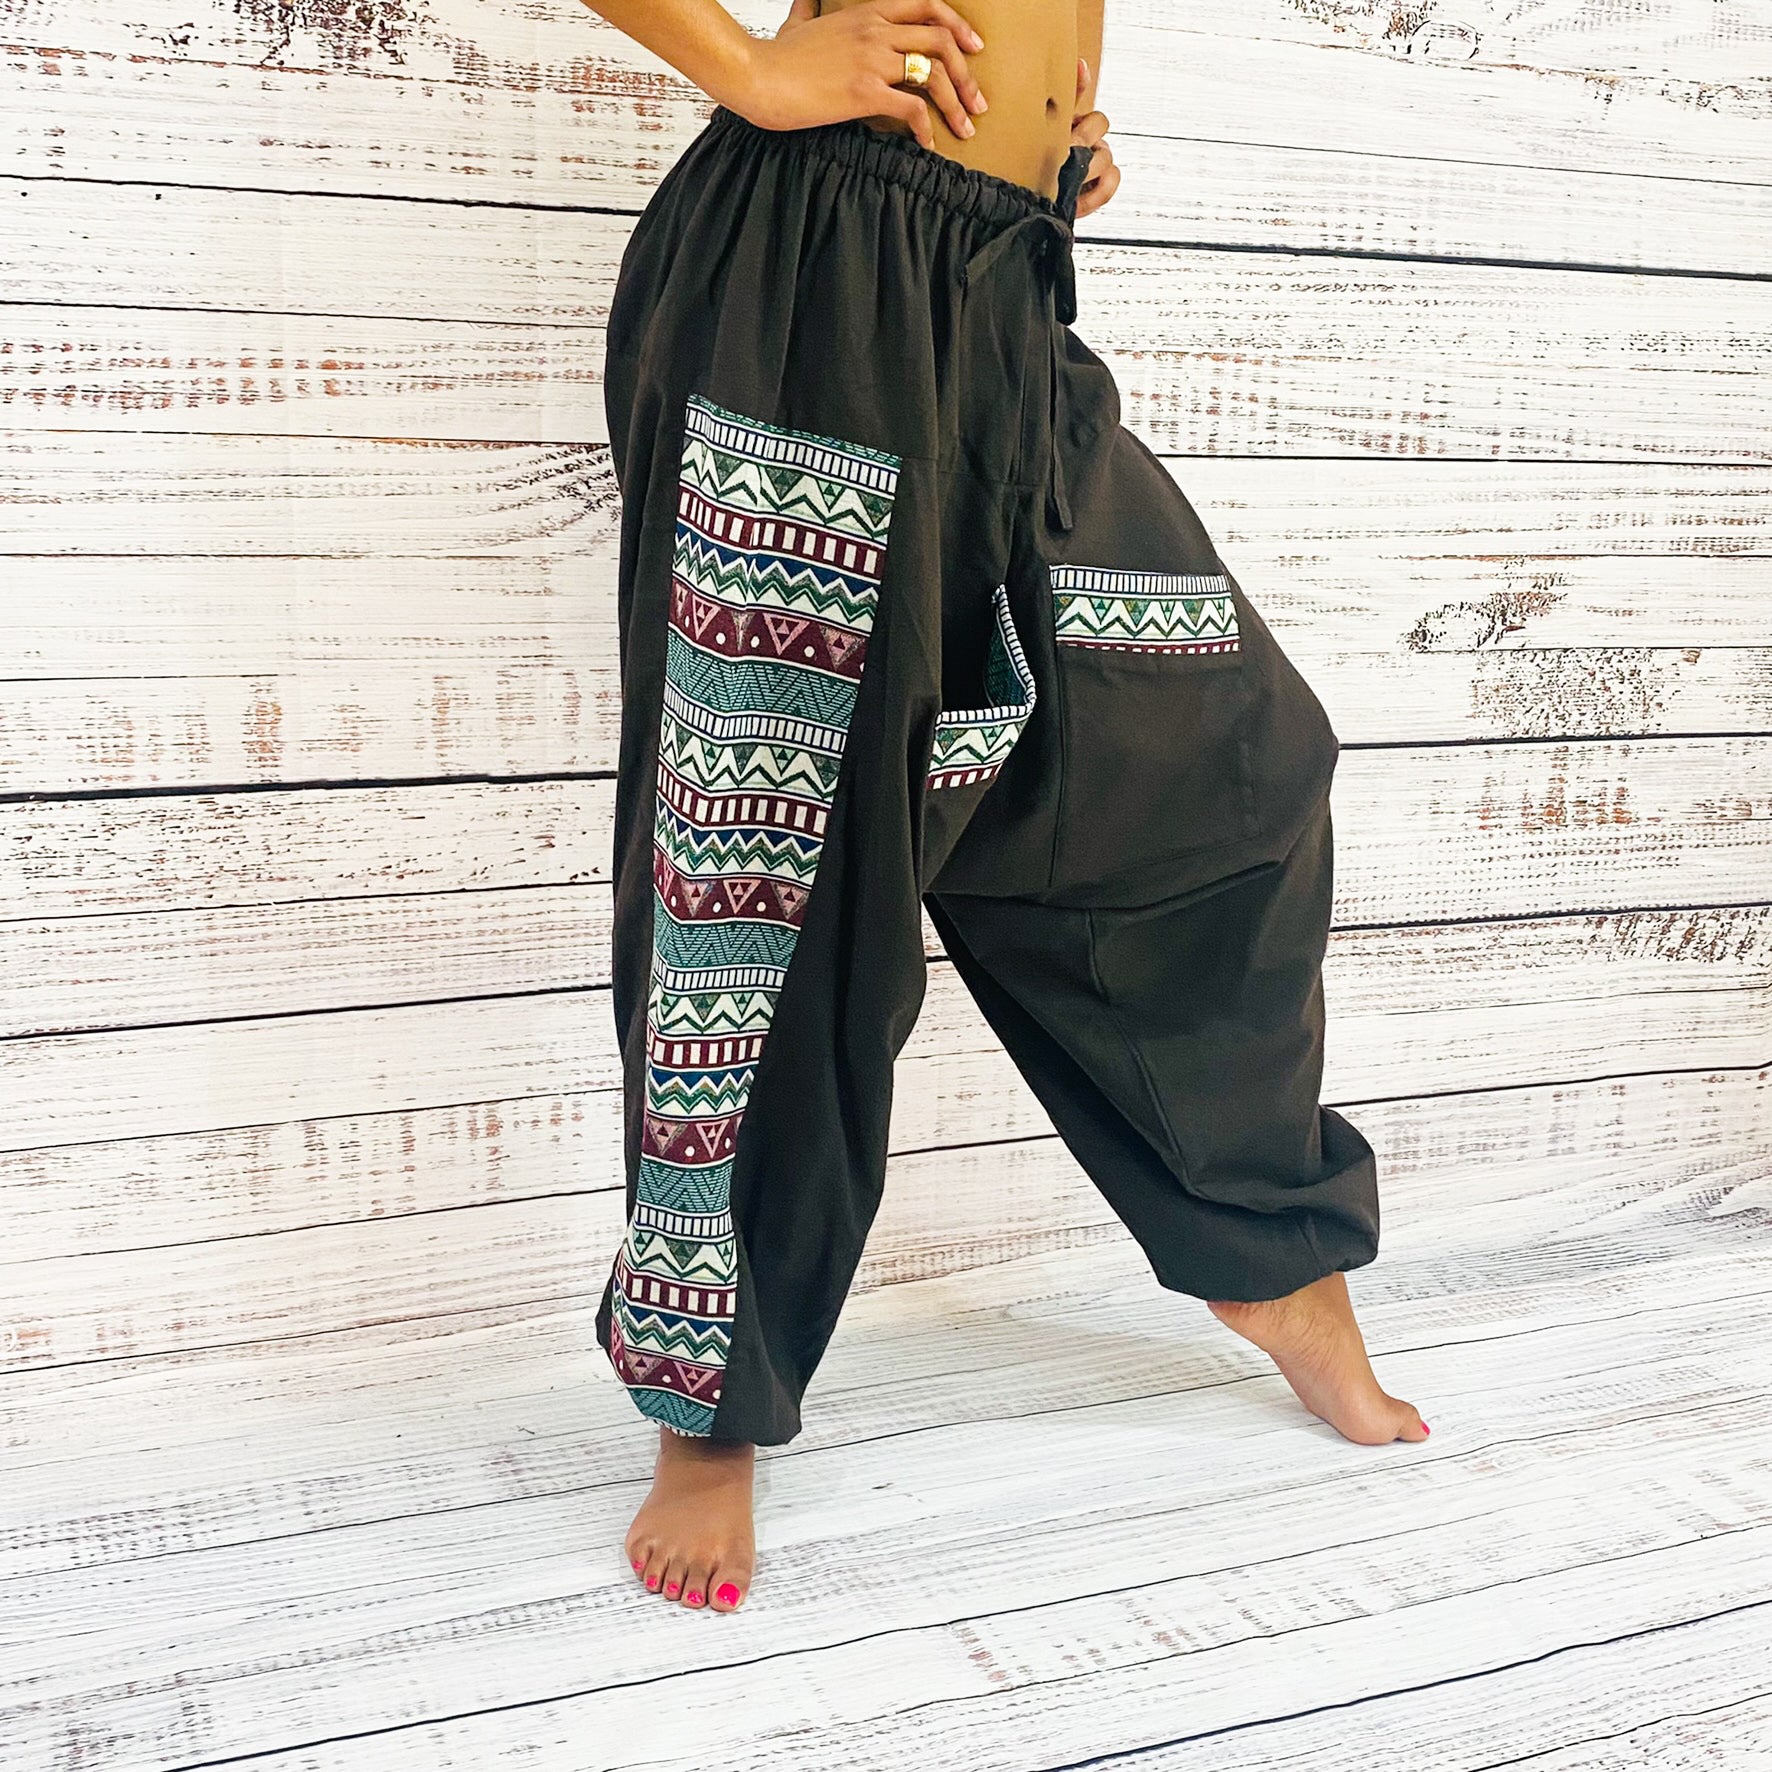 Native American Inspired Pants and Clothing for Women, Tribal Cotton Pants,  Embroidery Pants, Aladdin Pants, America Indian Pants, Nomadic 